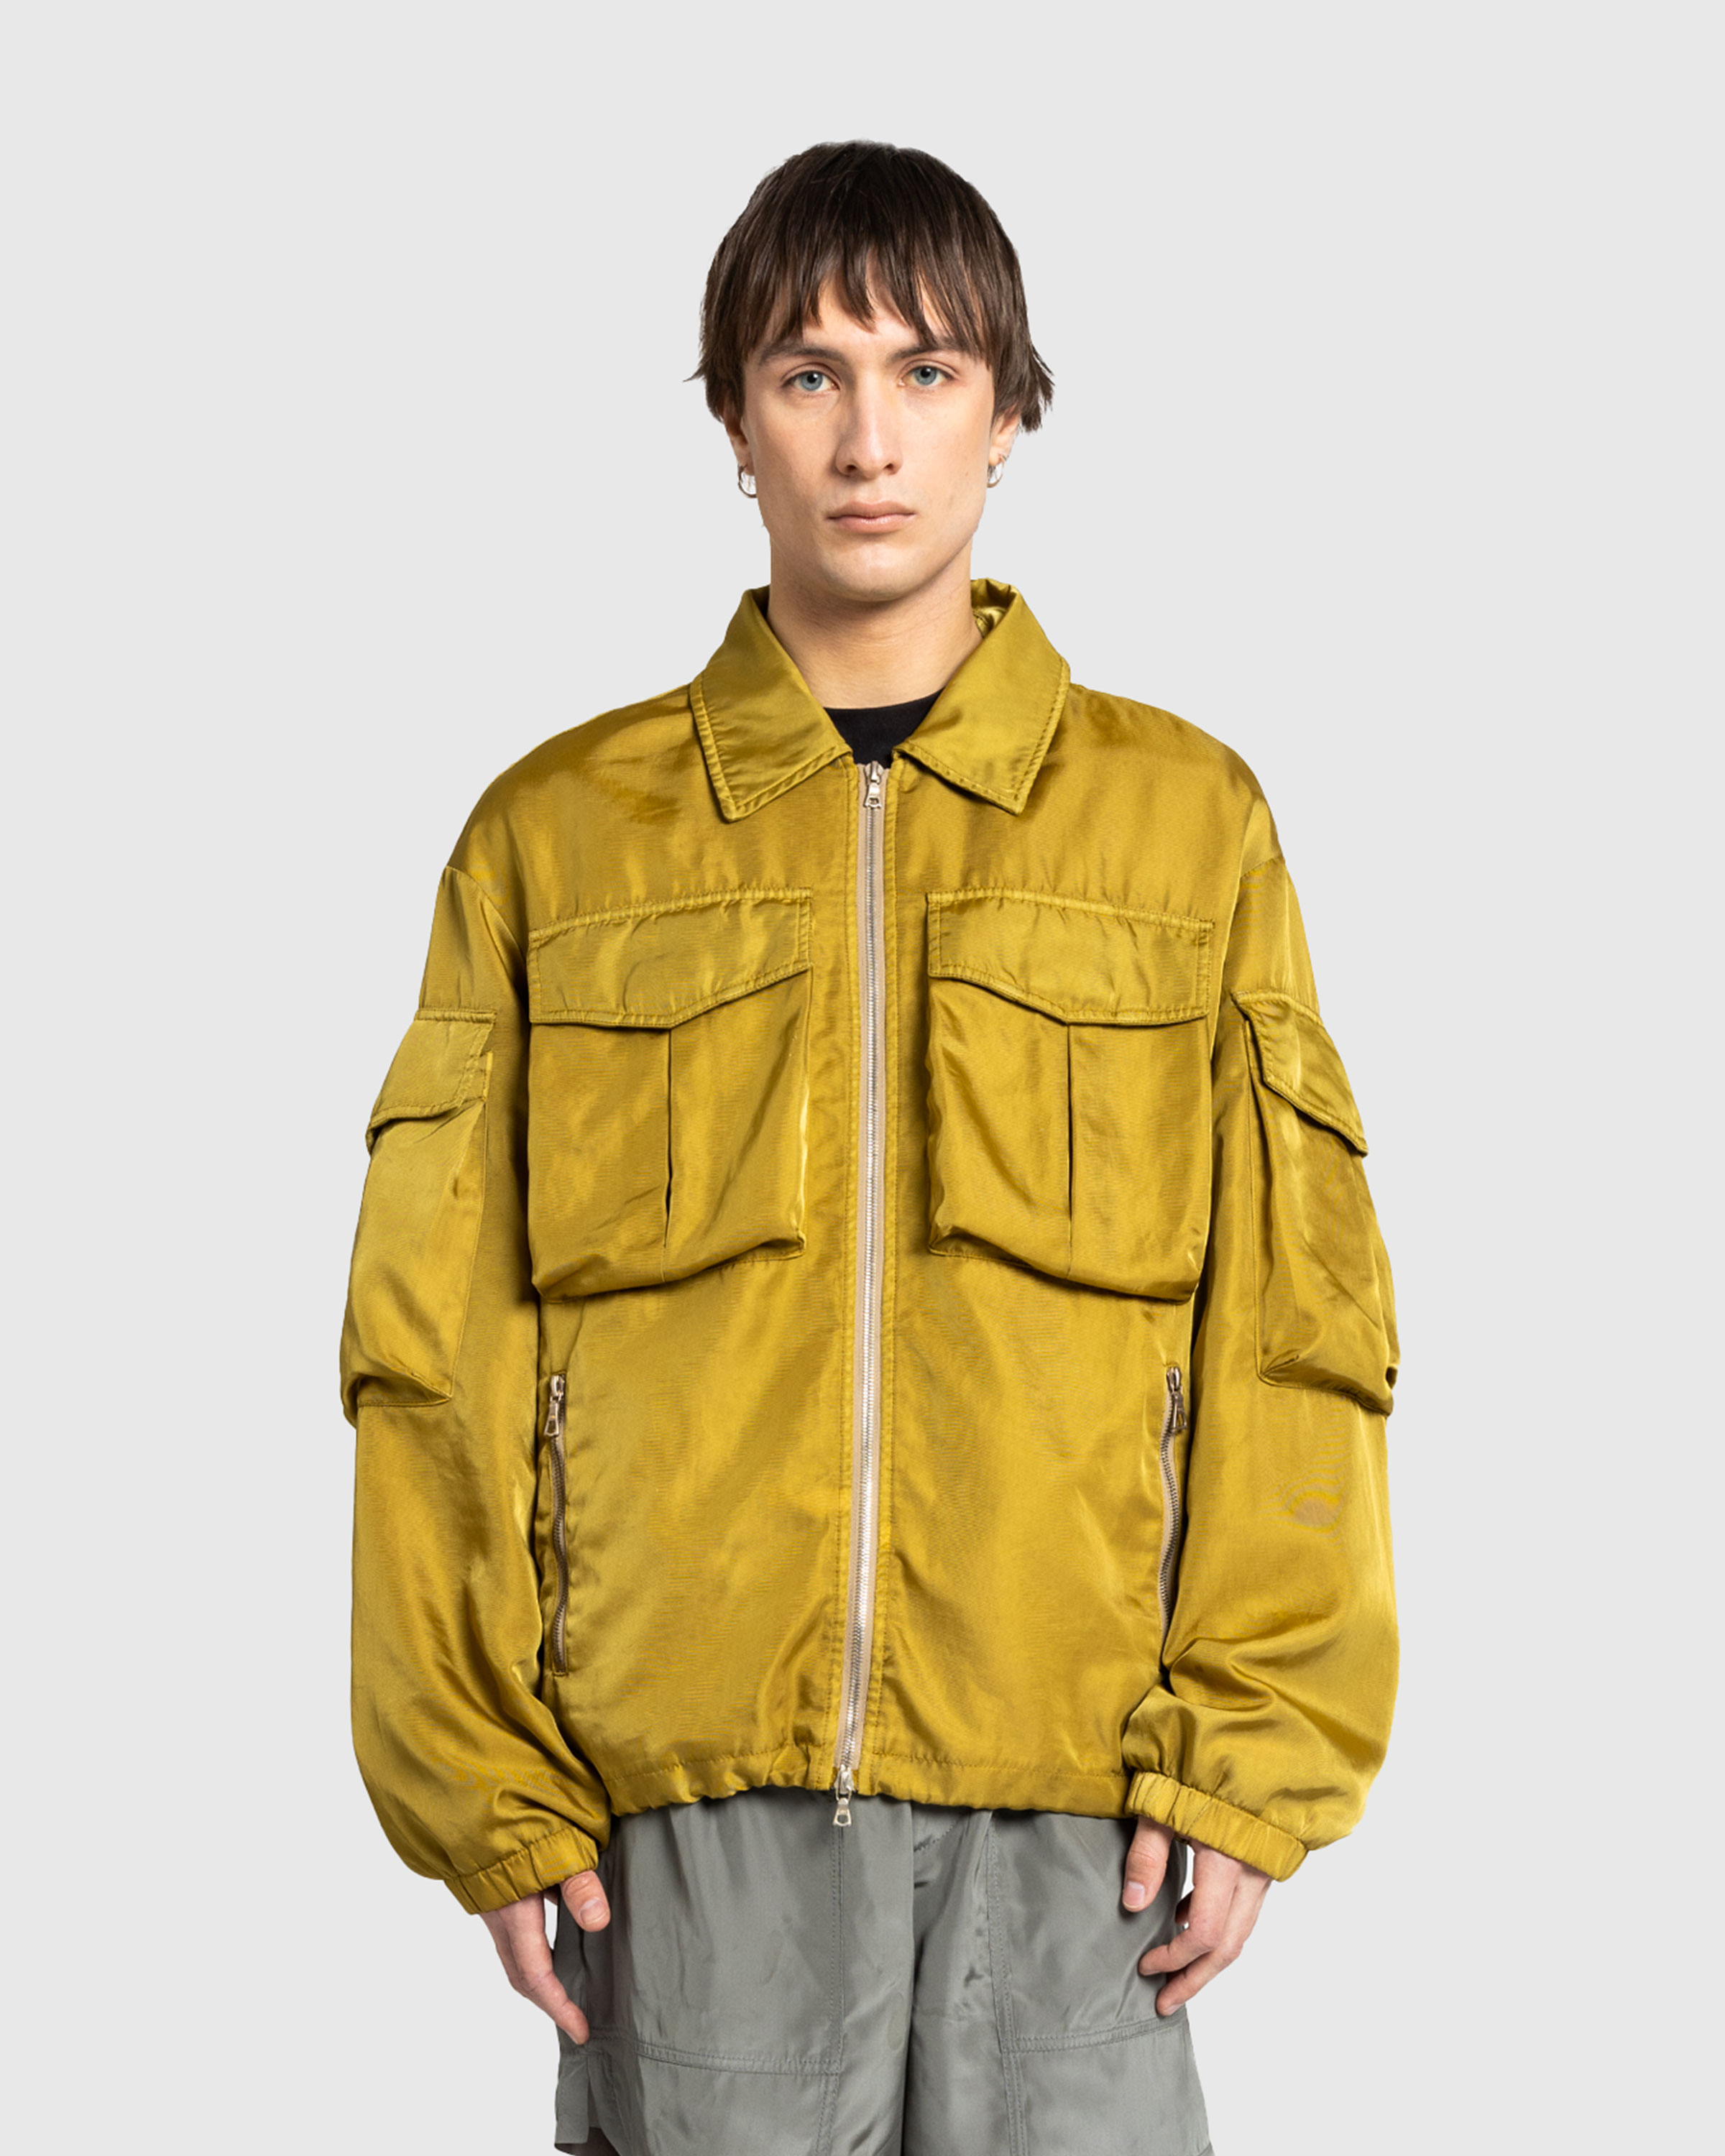 Dries van Noten – Overdyed Jacket Olive - Outerwear - Green - Image 2